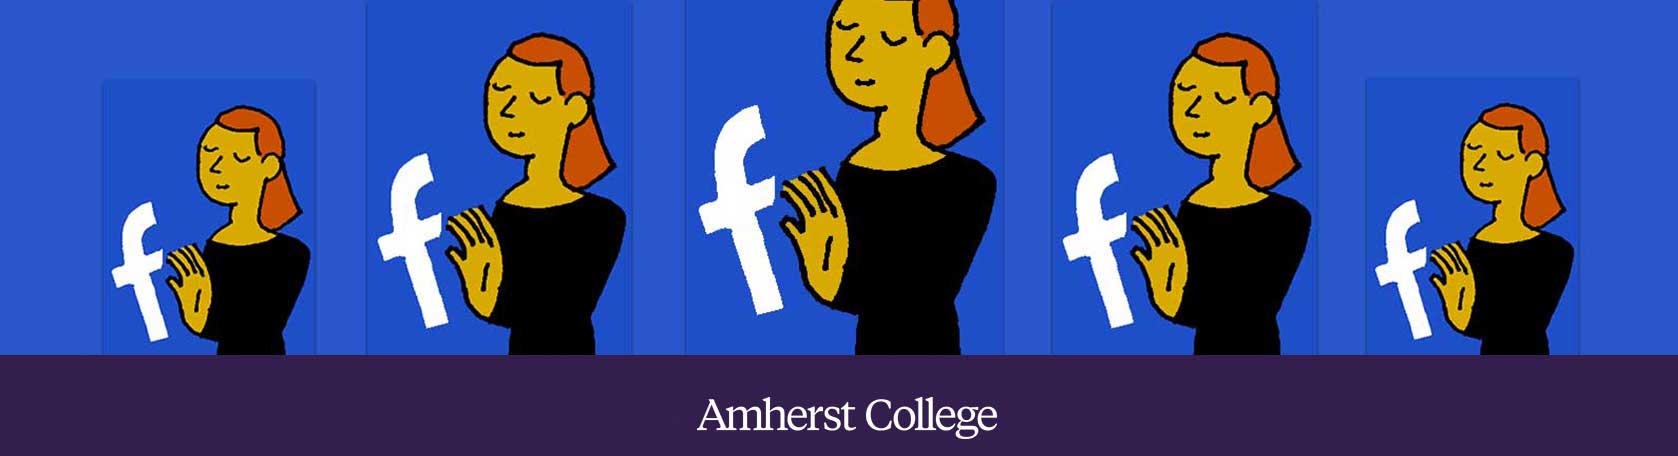 An illustration of a woman holding her hand up to ward of the Facebook F.